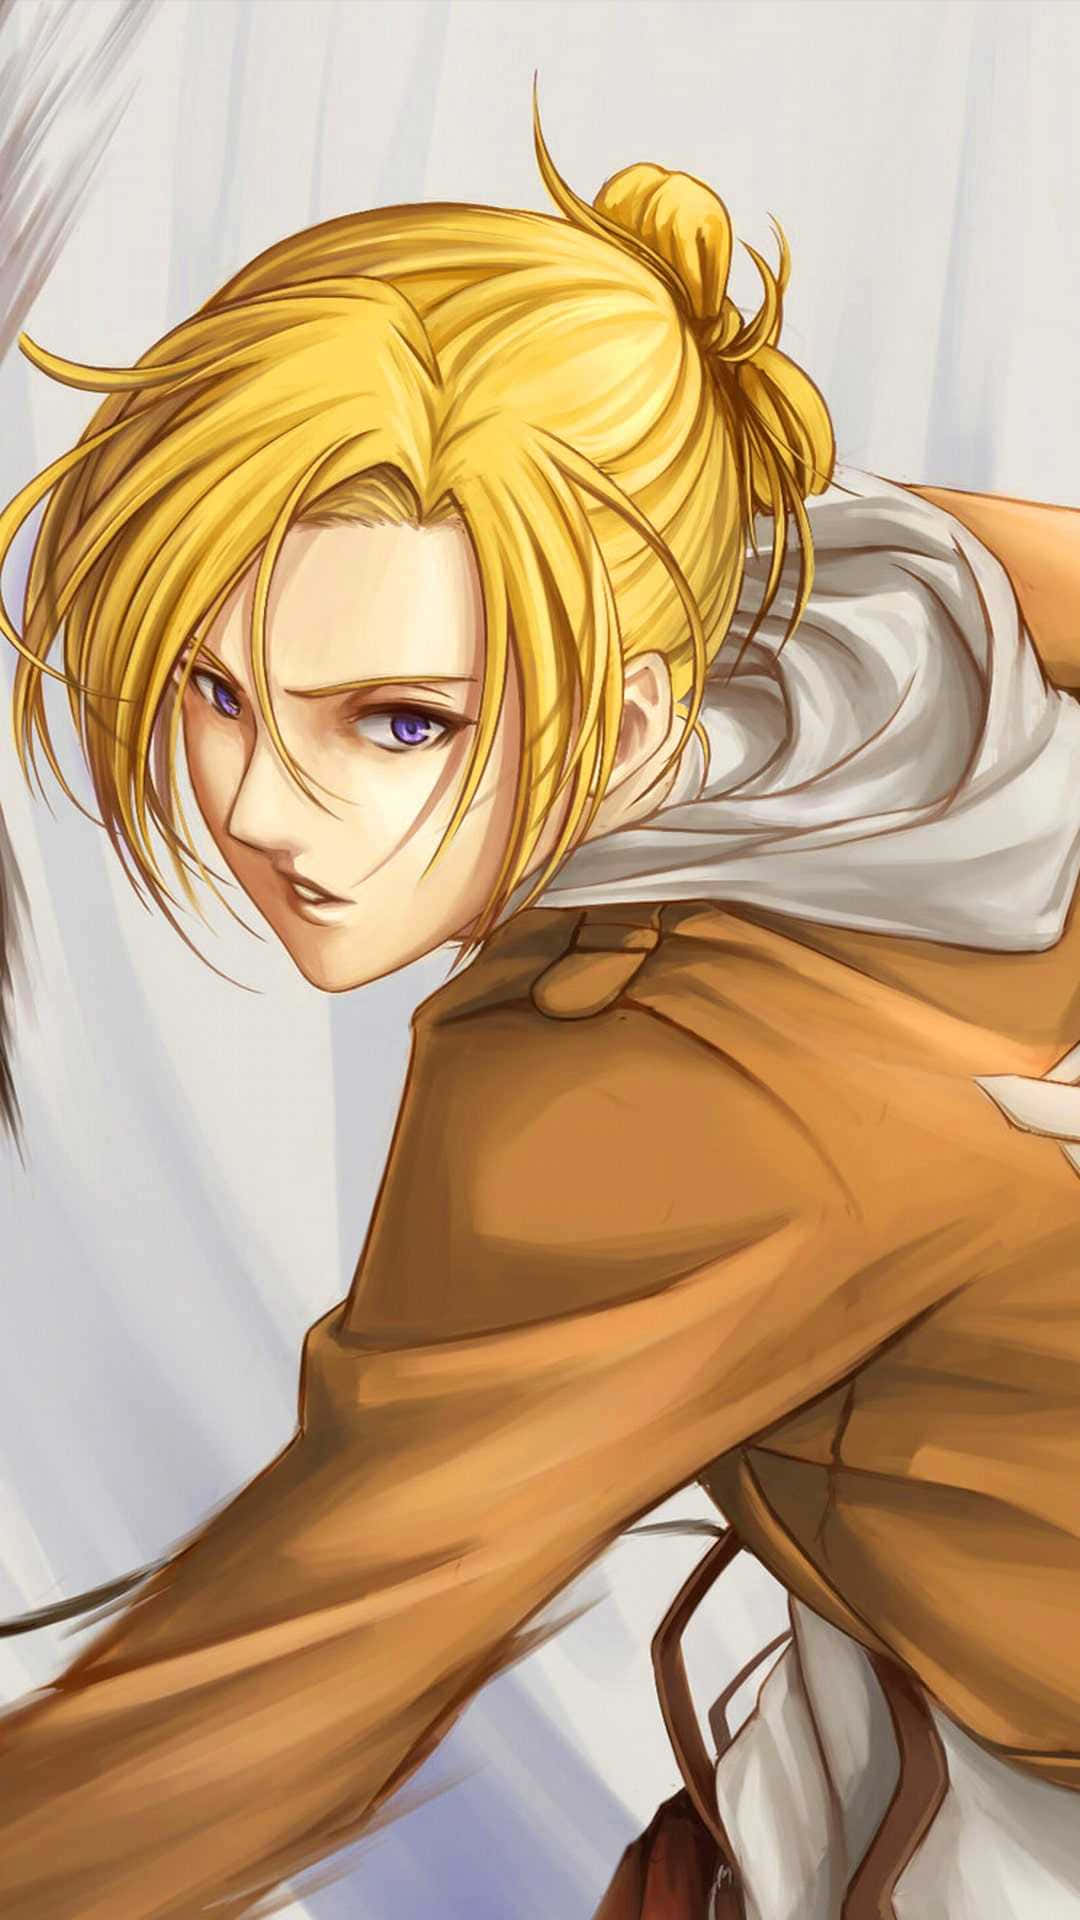 Annie Leonhart rules over the Titans as one of the Elite Four Wallpaper